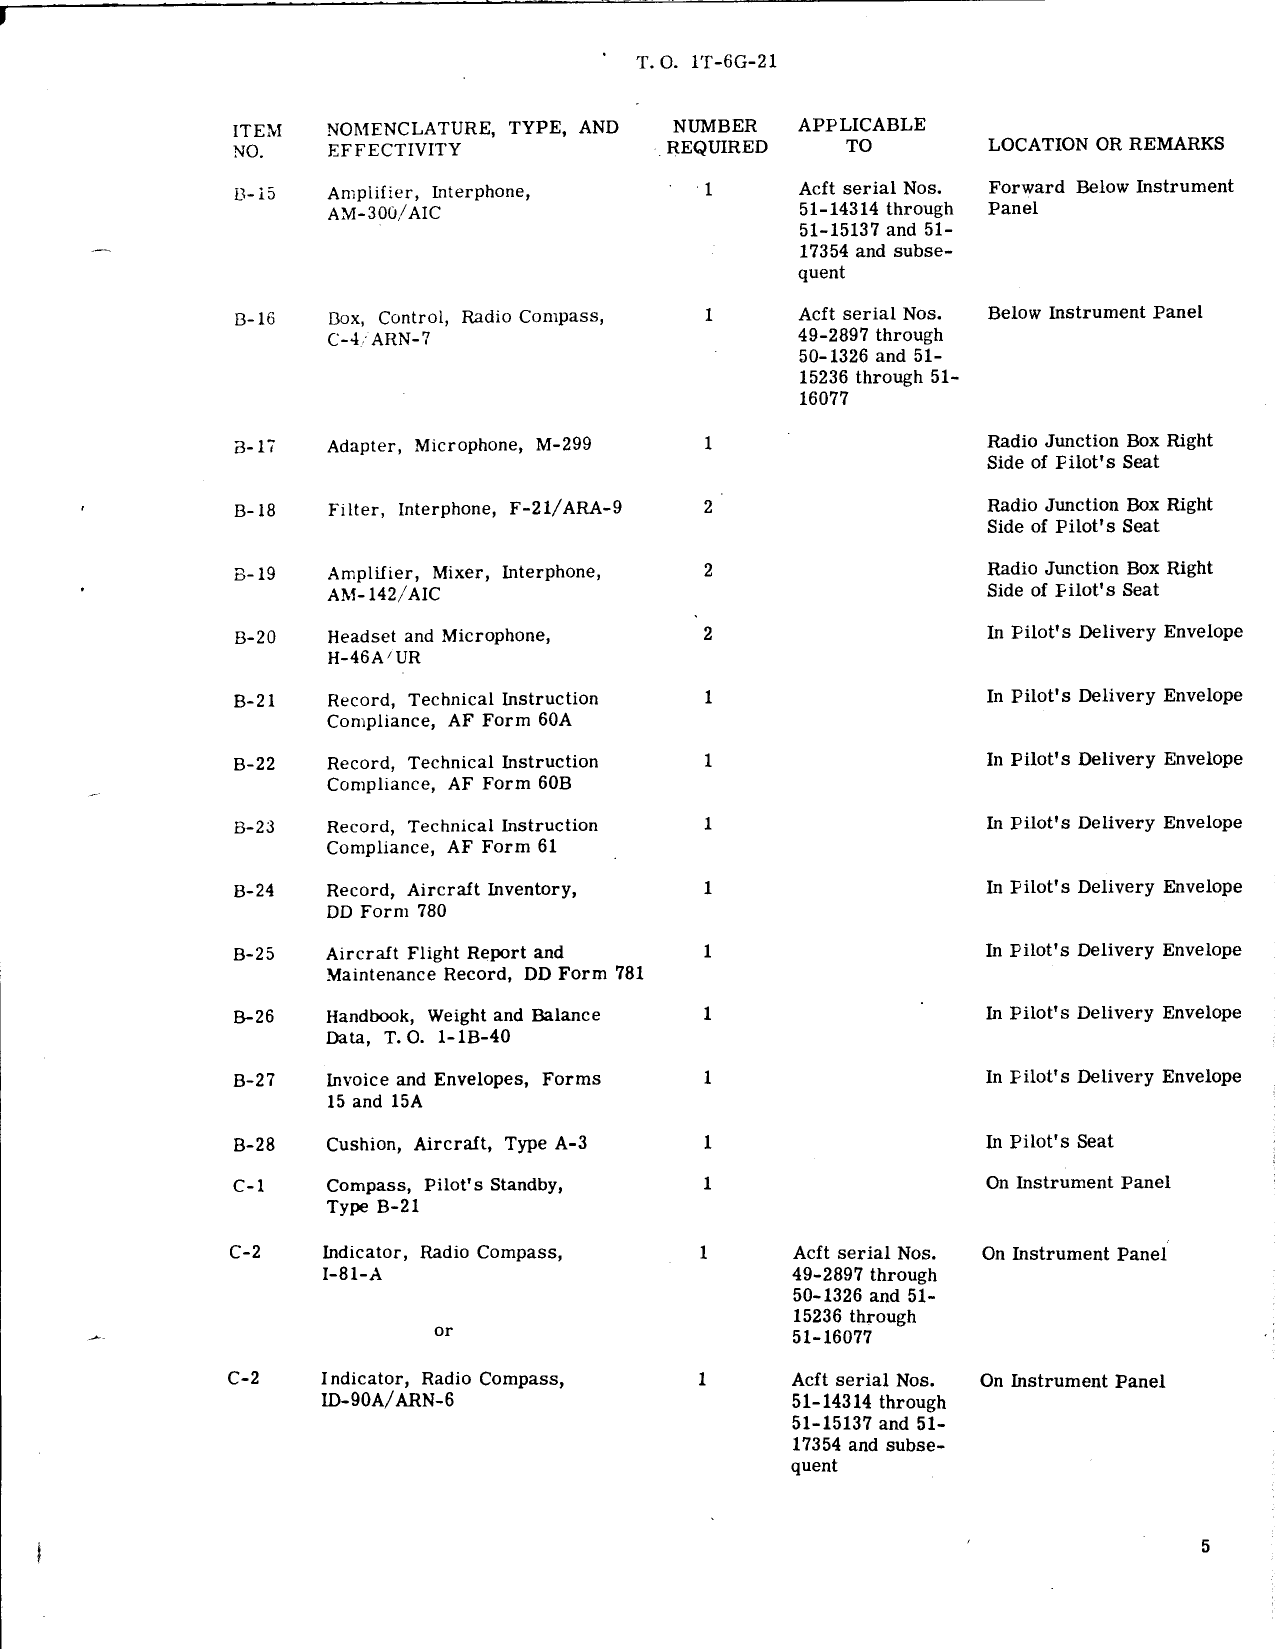 Sample page 5 from AirCorps Library document: Aircraft Inventory Record Master Guide for T-6G Aircraft